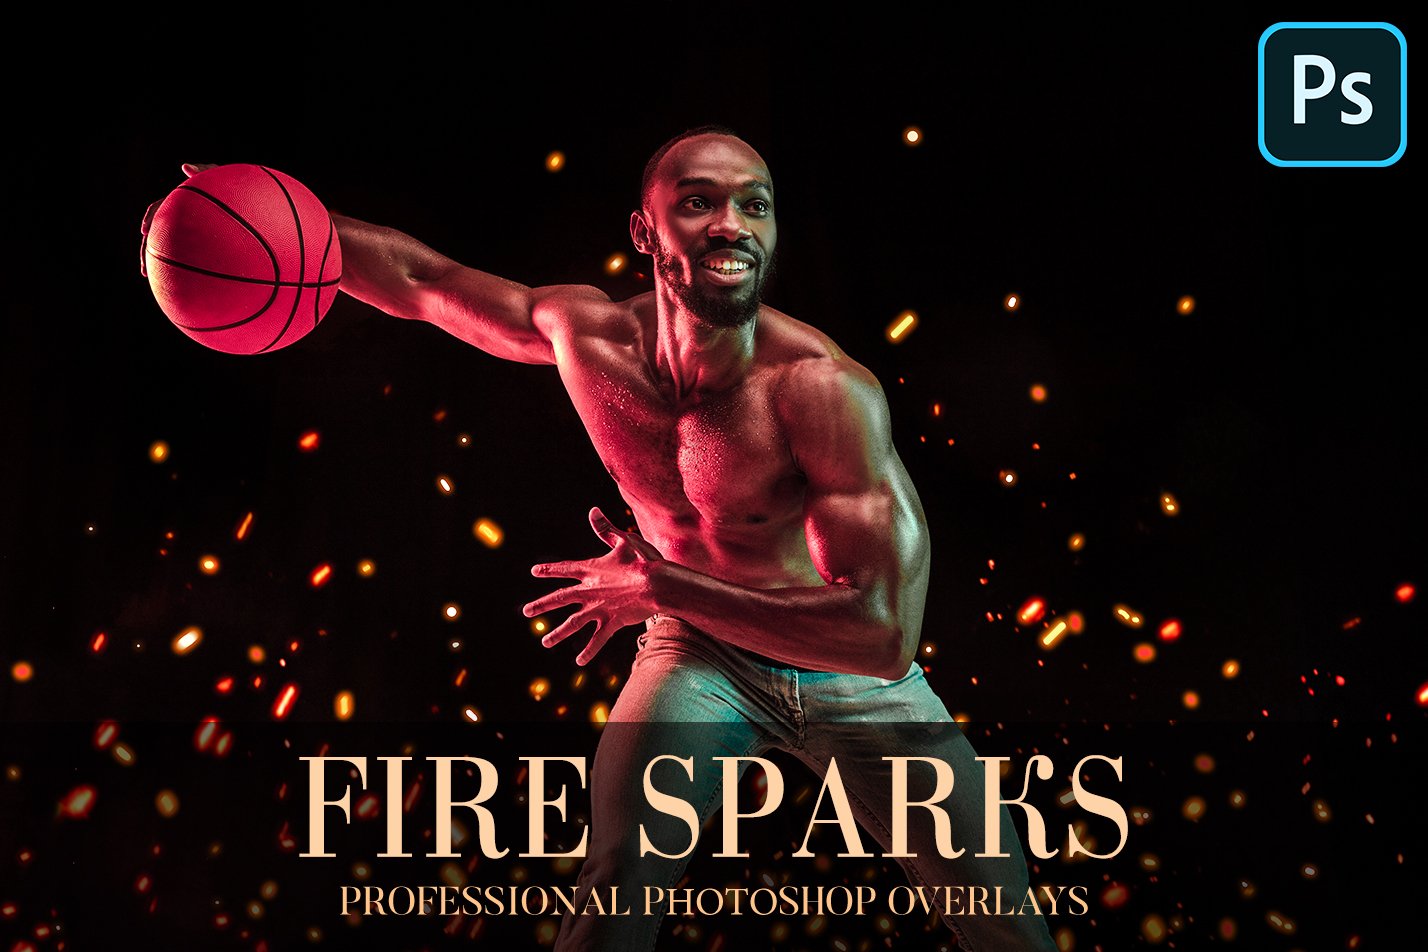 Fire Sparks Overlays Photoshopcover image.